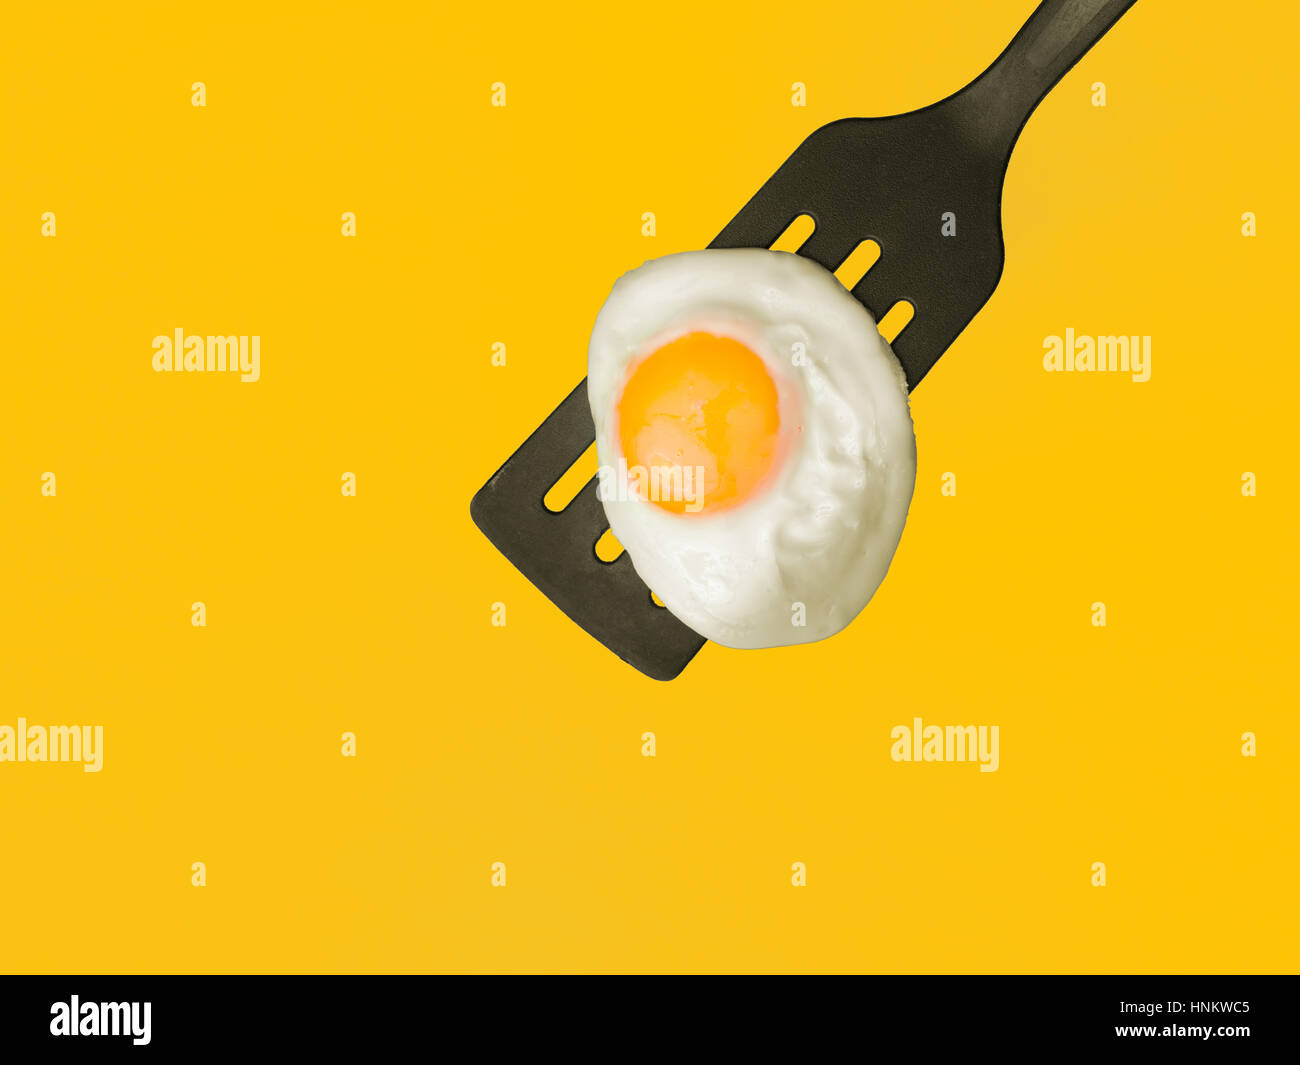 Sunny side up egg on a spatula 3/4-overhead view on yellow background Stock Photo